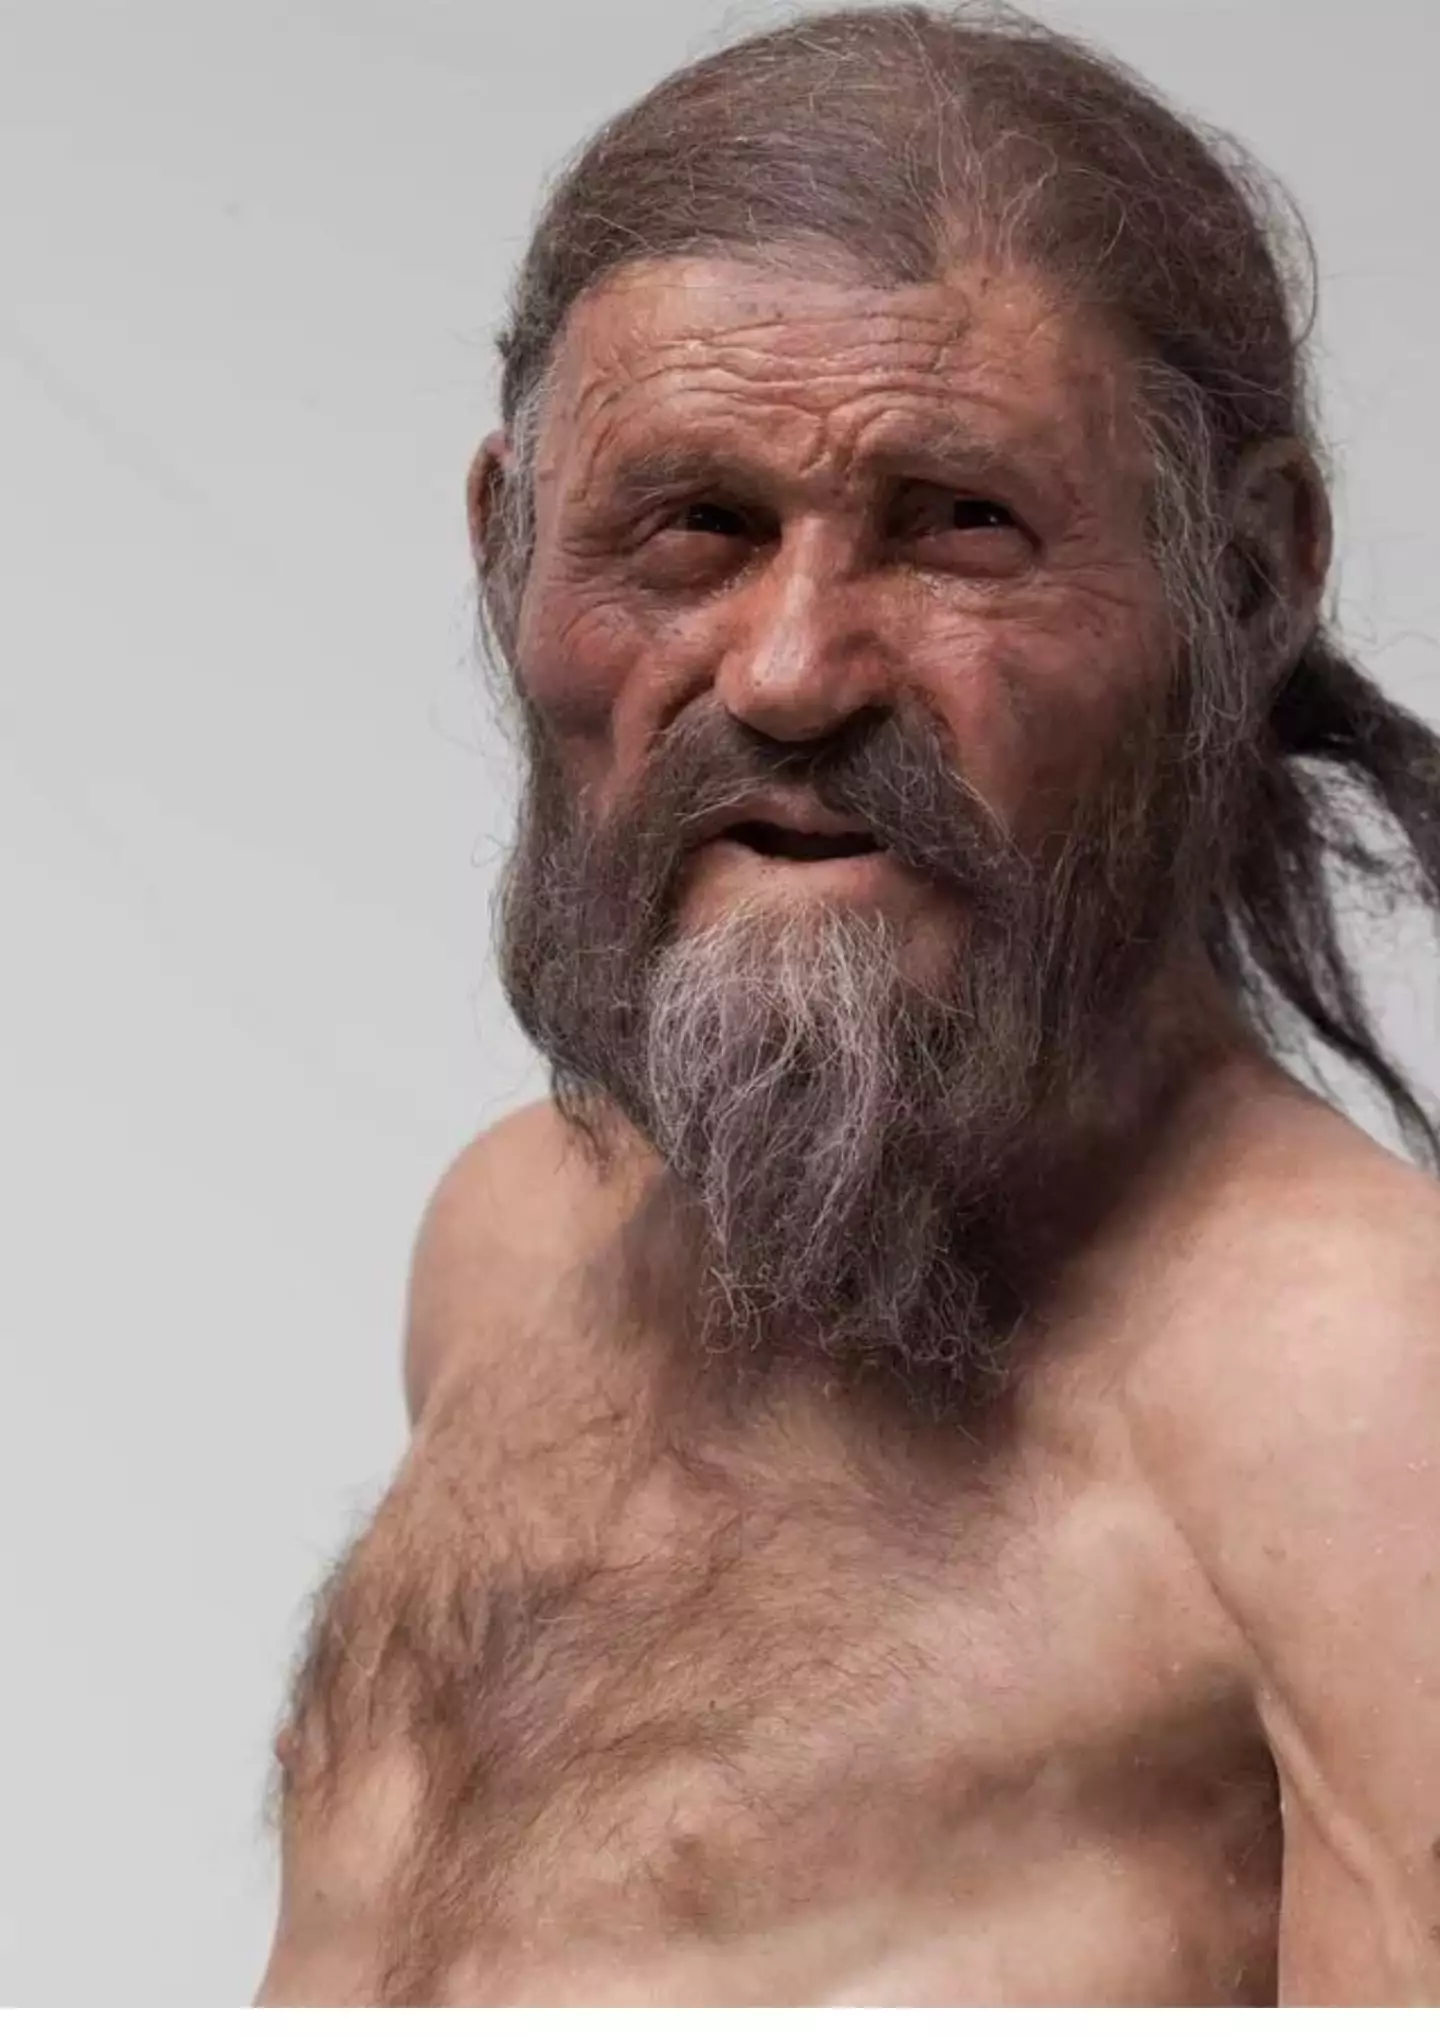 Here's what experts believe Ötzi the Iceman would have looked like.